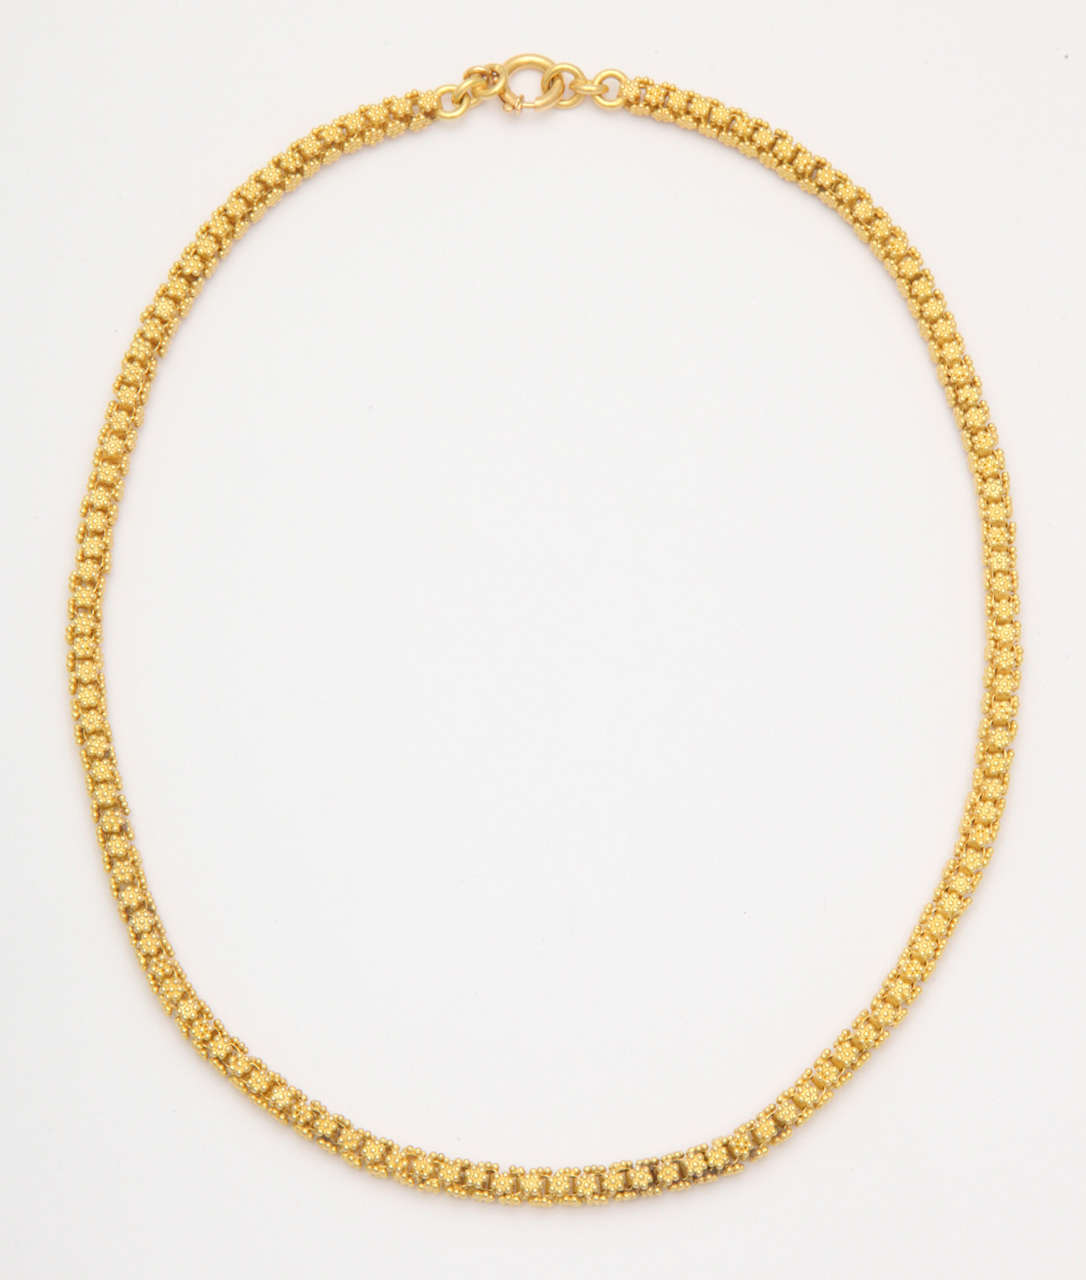 Beautifully made 22kt Yellow Gold chain in an Orientalizing Style. A combination of pure simplicity & richness  of design.